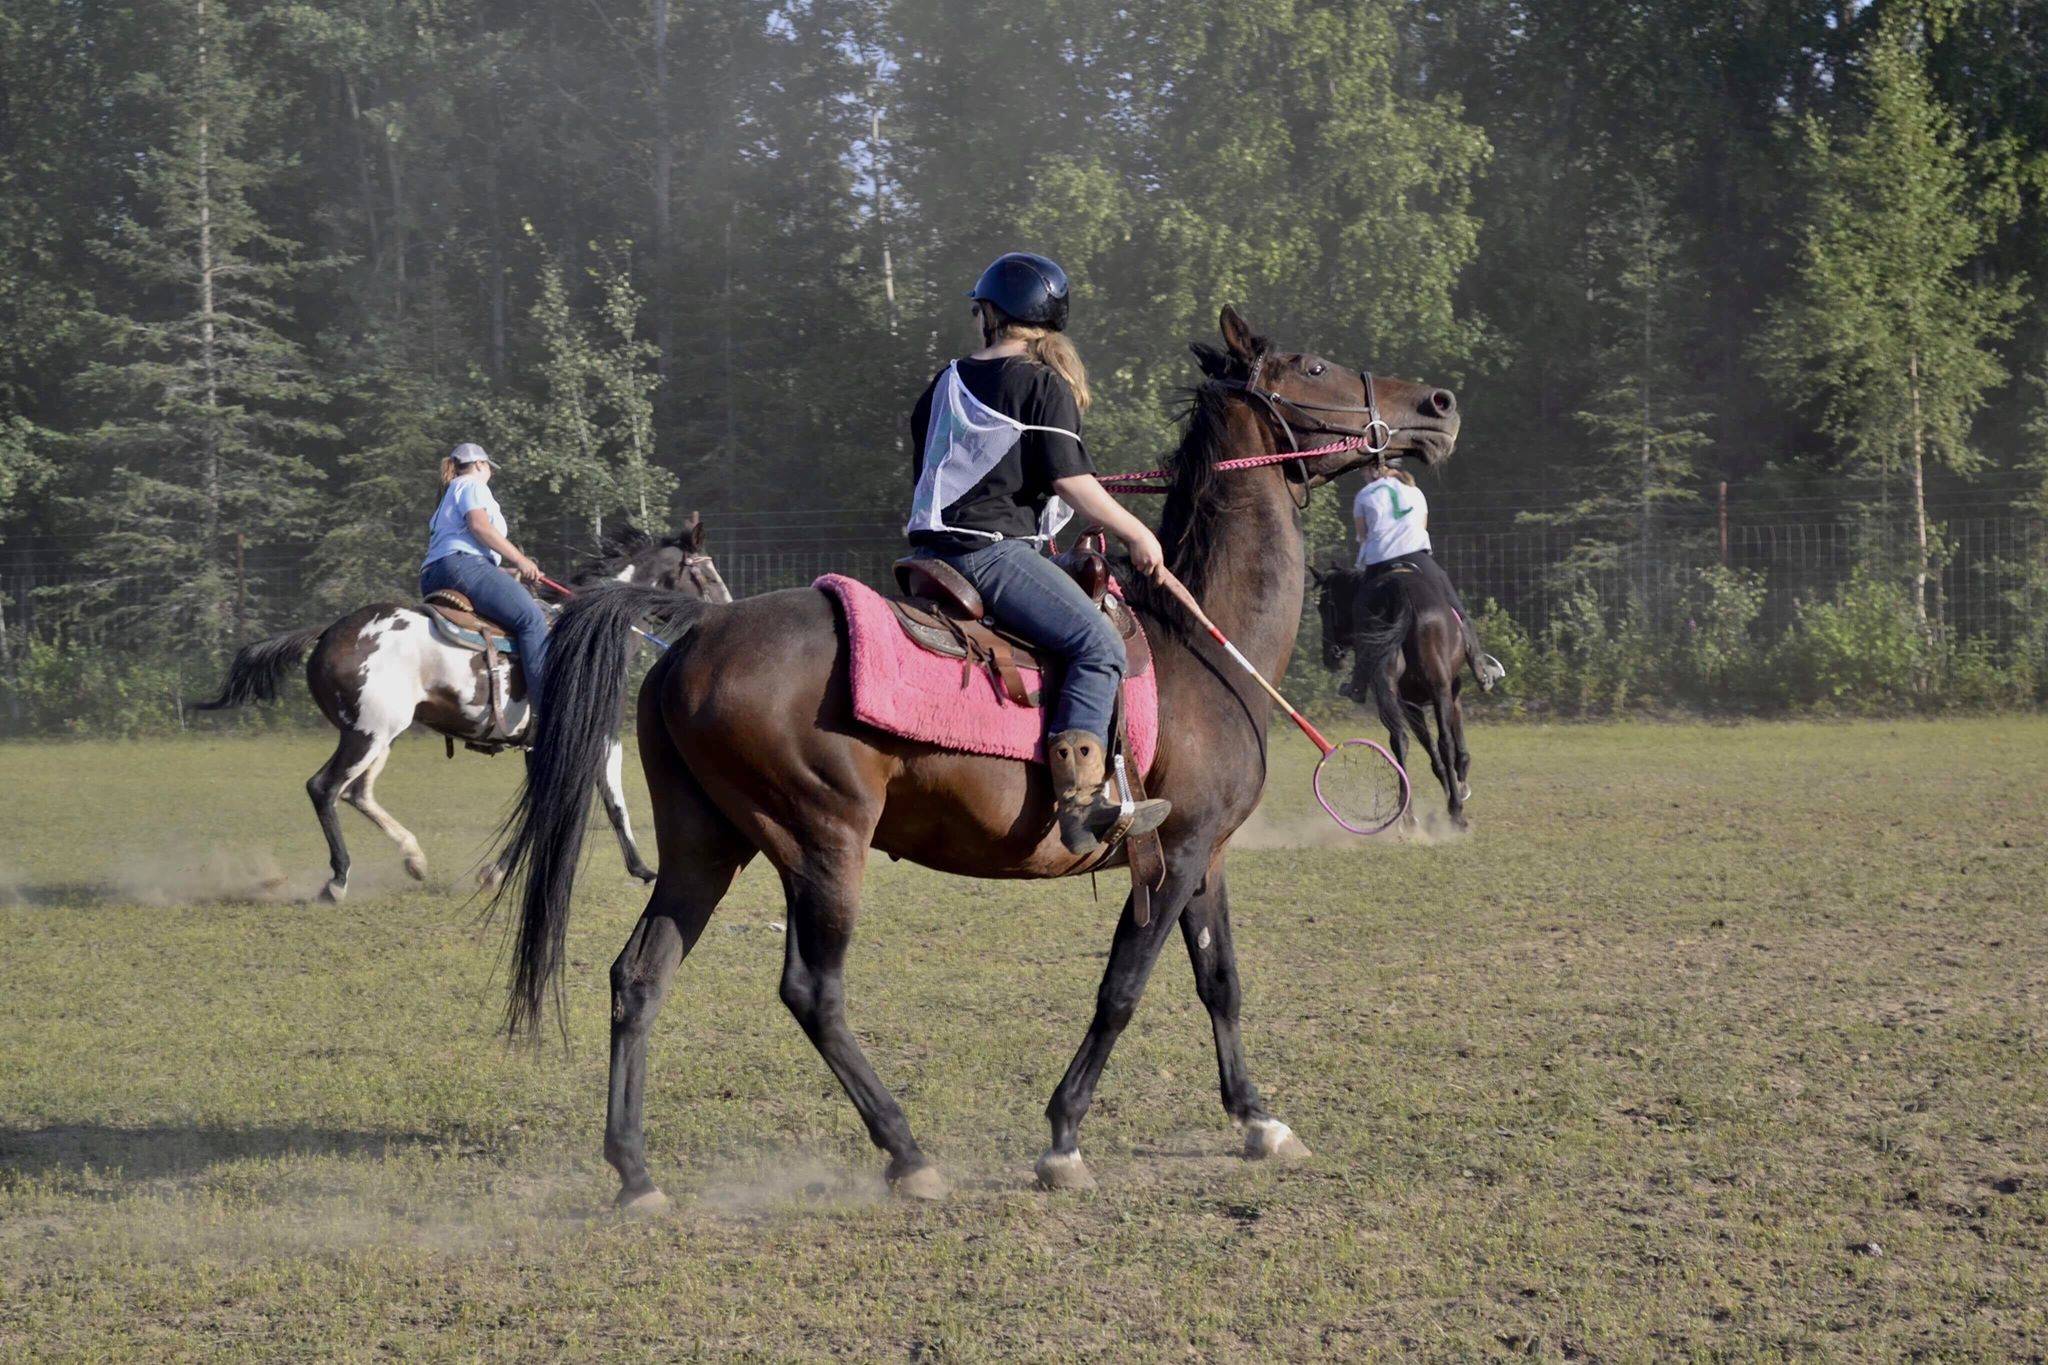 Maya Johnson, the Kenai polocrosse organizer, rides her horse during a game of polocrosse, a sport combining rules of polo and lacrosse, Thursday, July, 25, 2019 near Soldotna, Alaska. (Photo by Victoria Petersen/Peninsula Clarion)